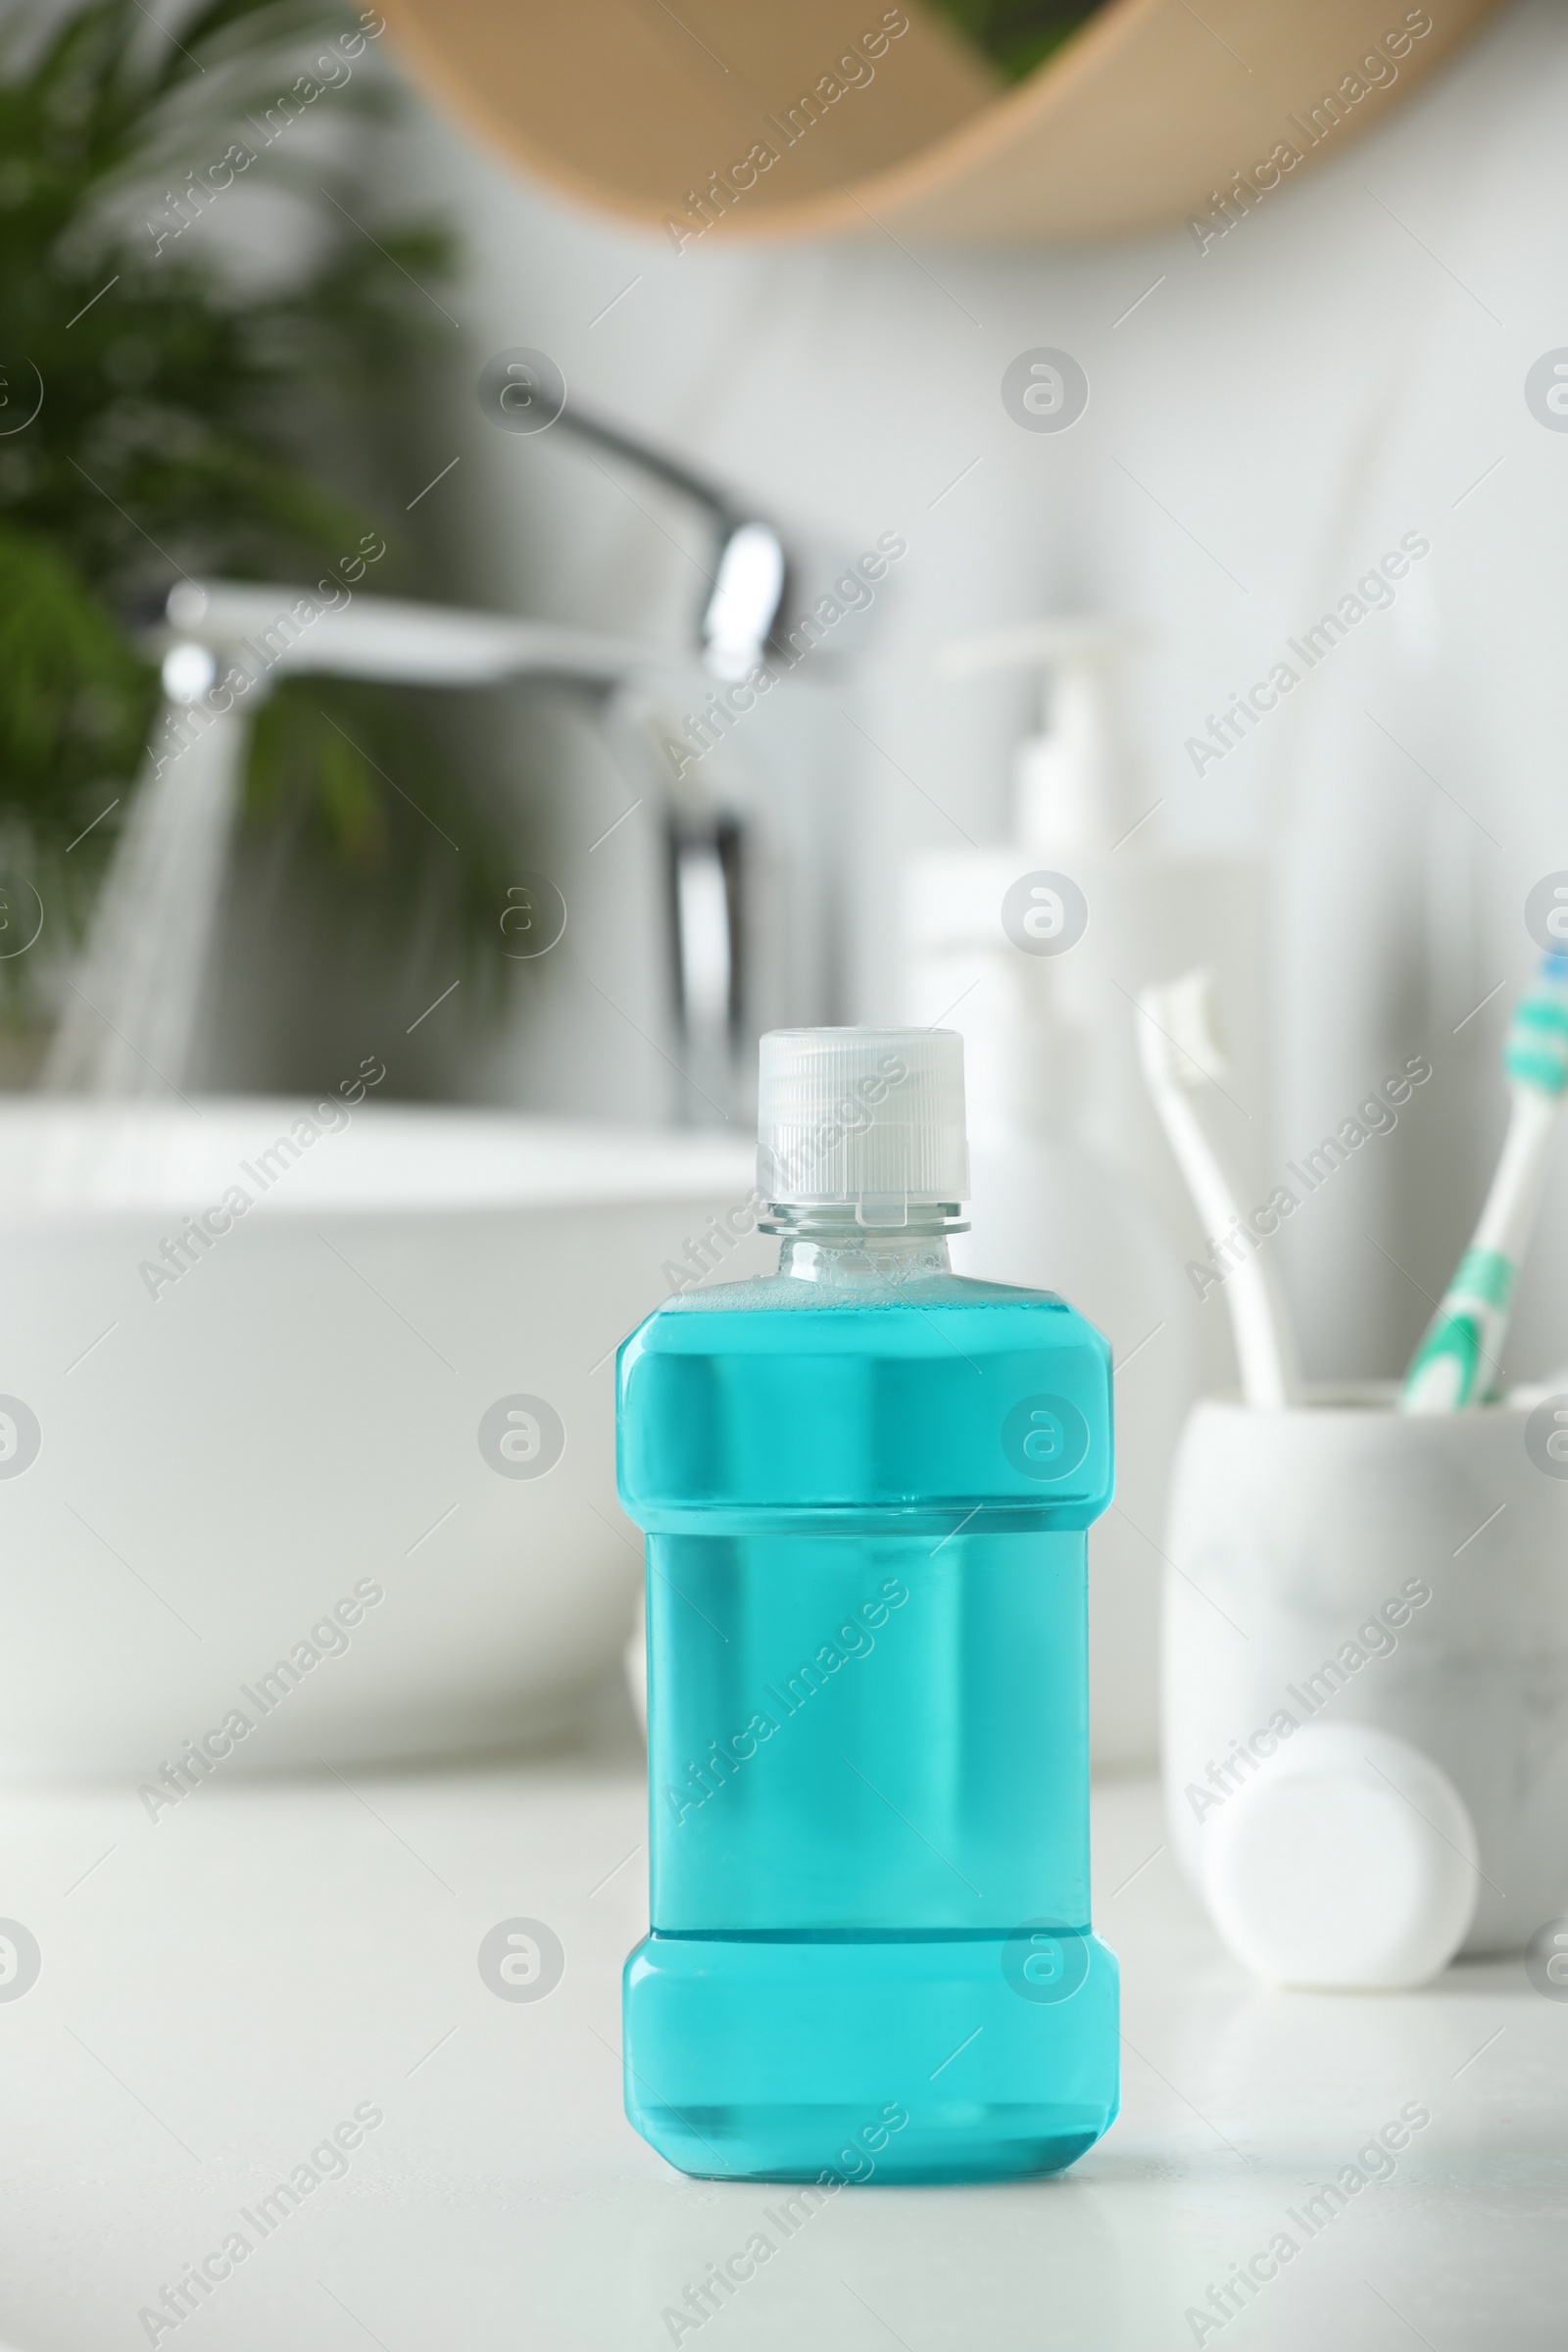 Photo of Mouthwash, toothbrushes and dental floss on white countertop in bathroom